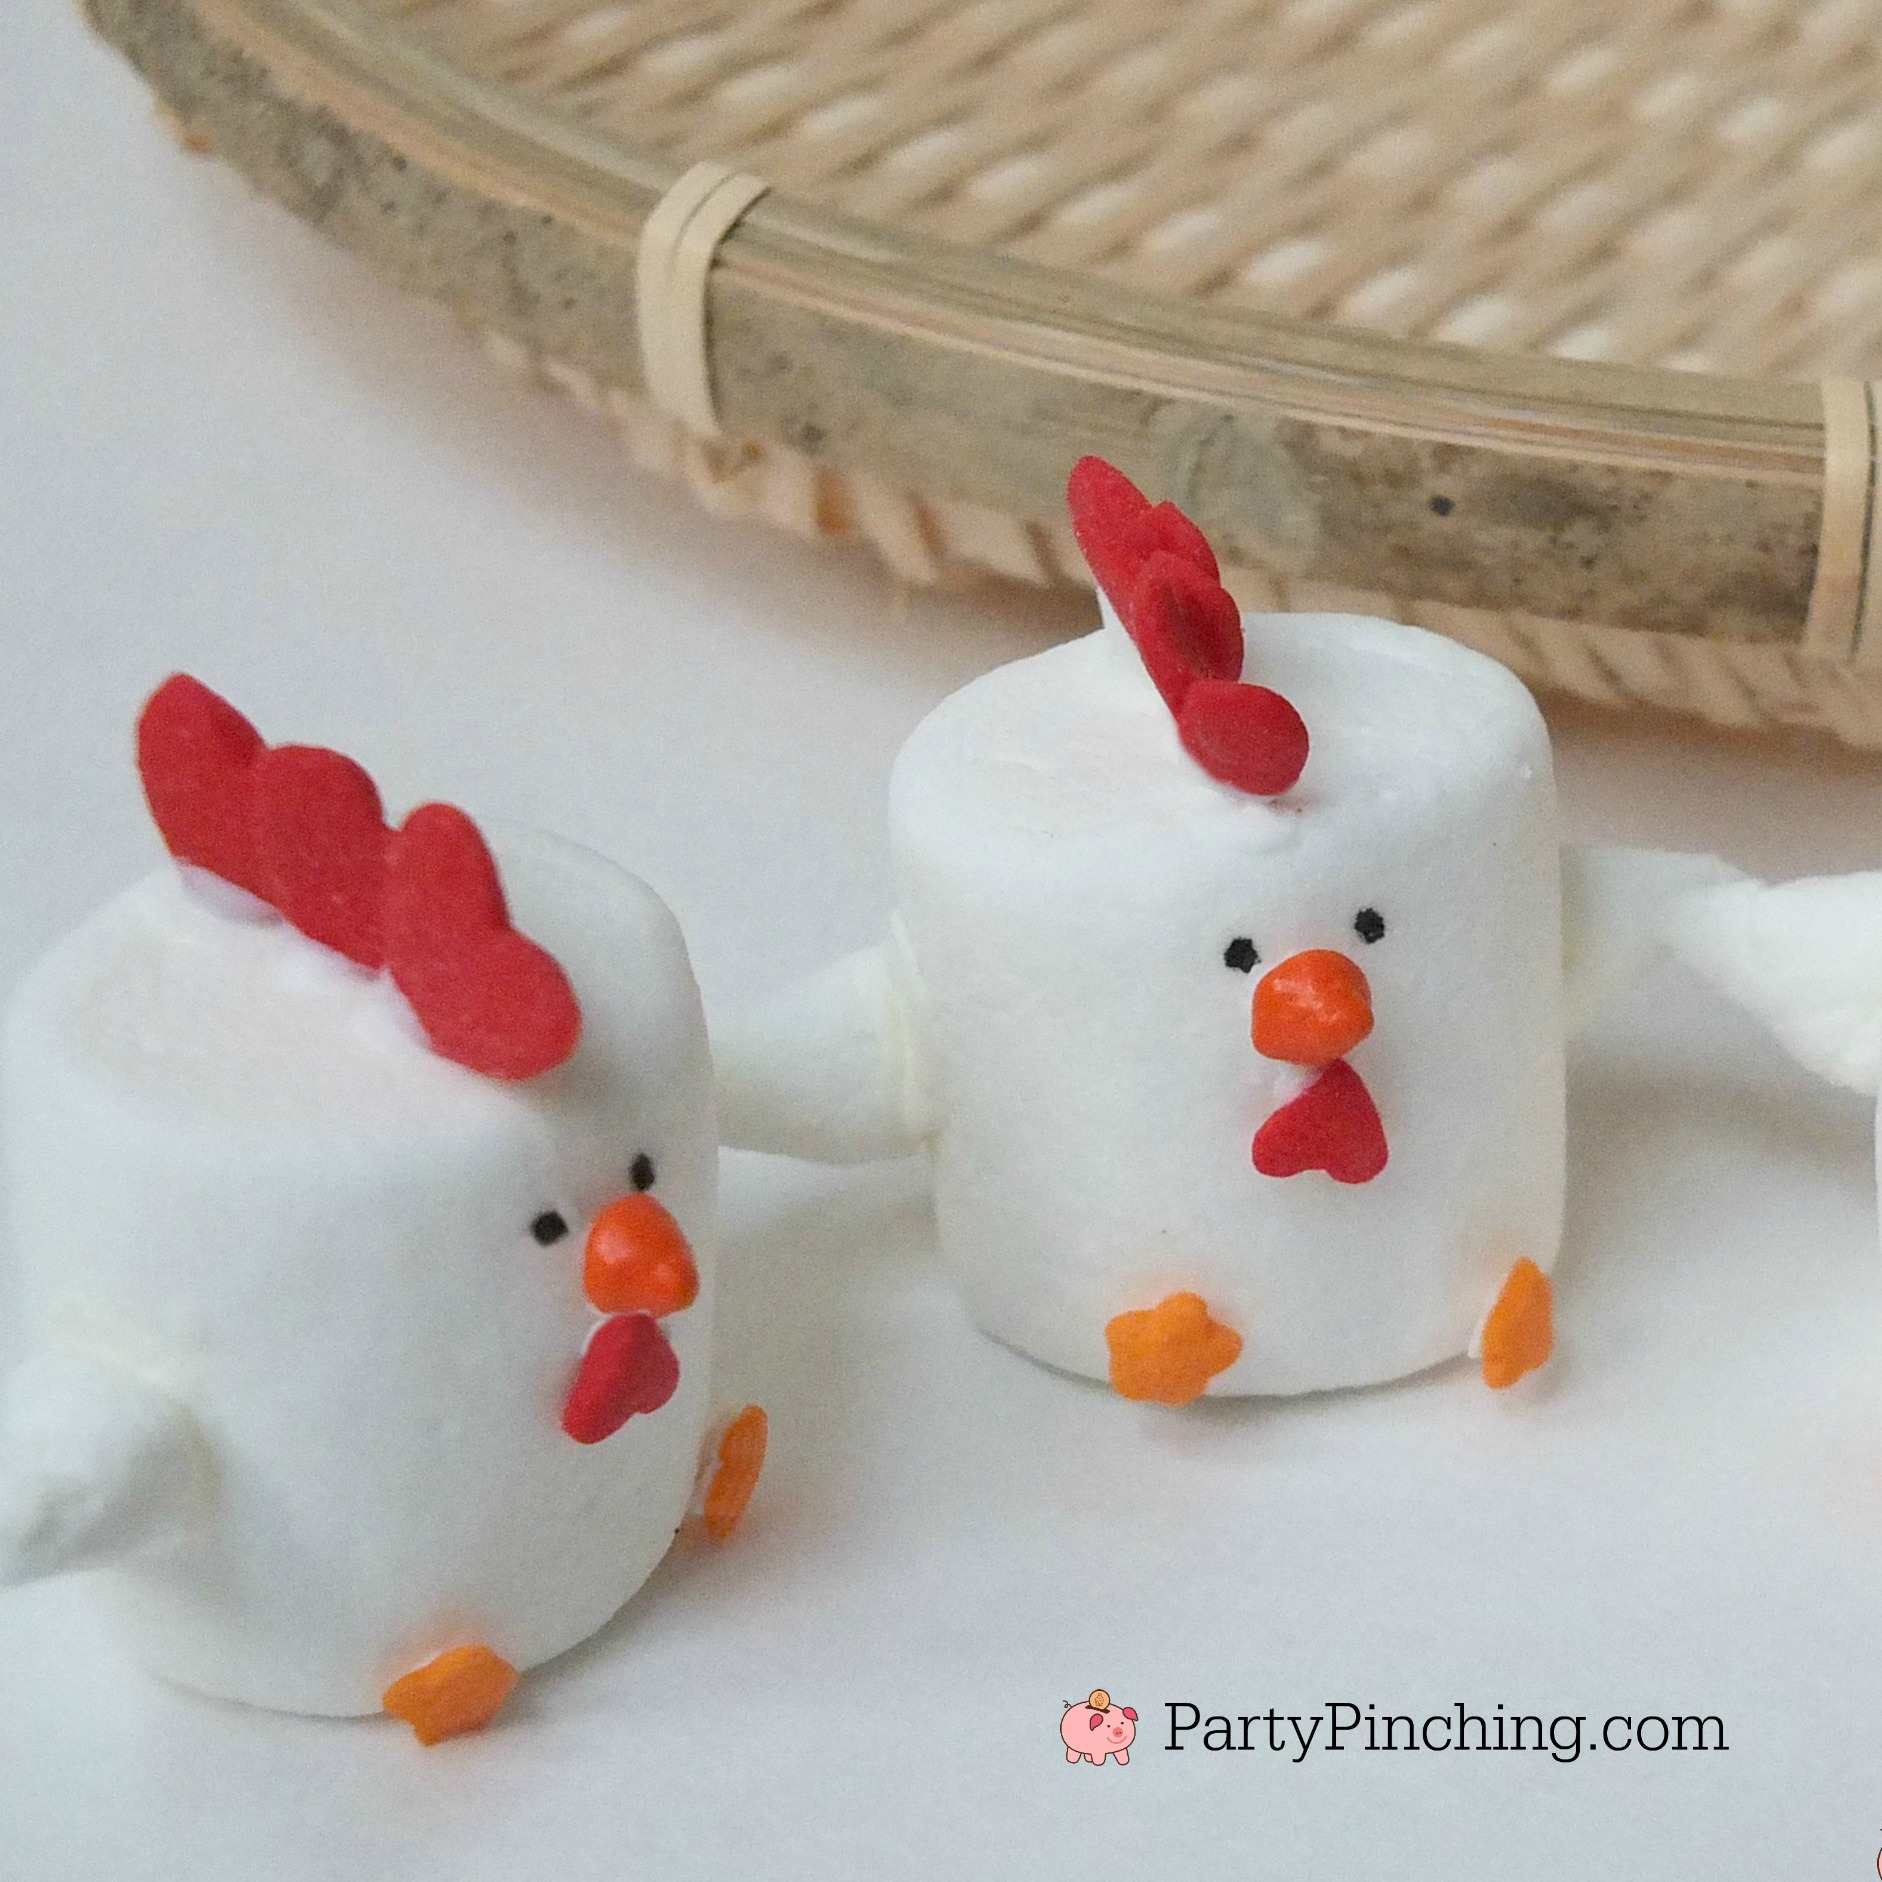 Rooster Marshmallows, Chinese New Year 2017 Rooster dessert, cute dessert treat for Lunar New Year, fun food for kids, sweet treats, easy dessert for Chinese New Year